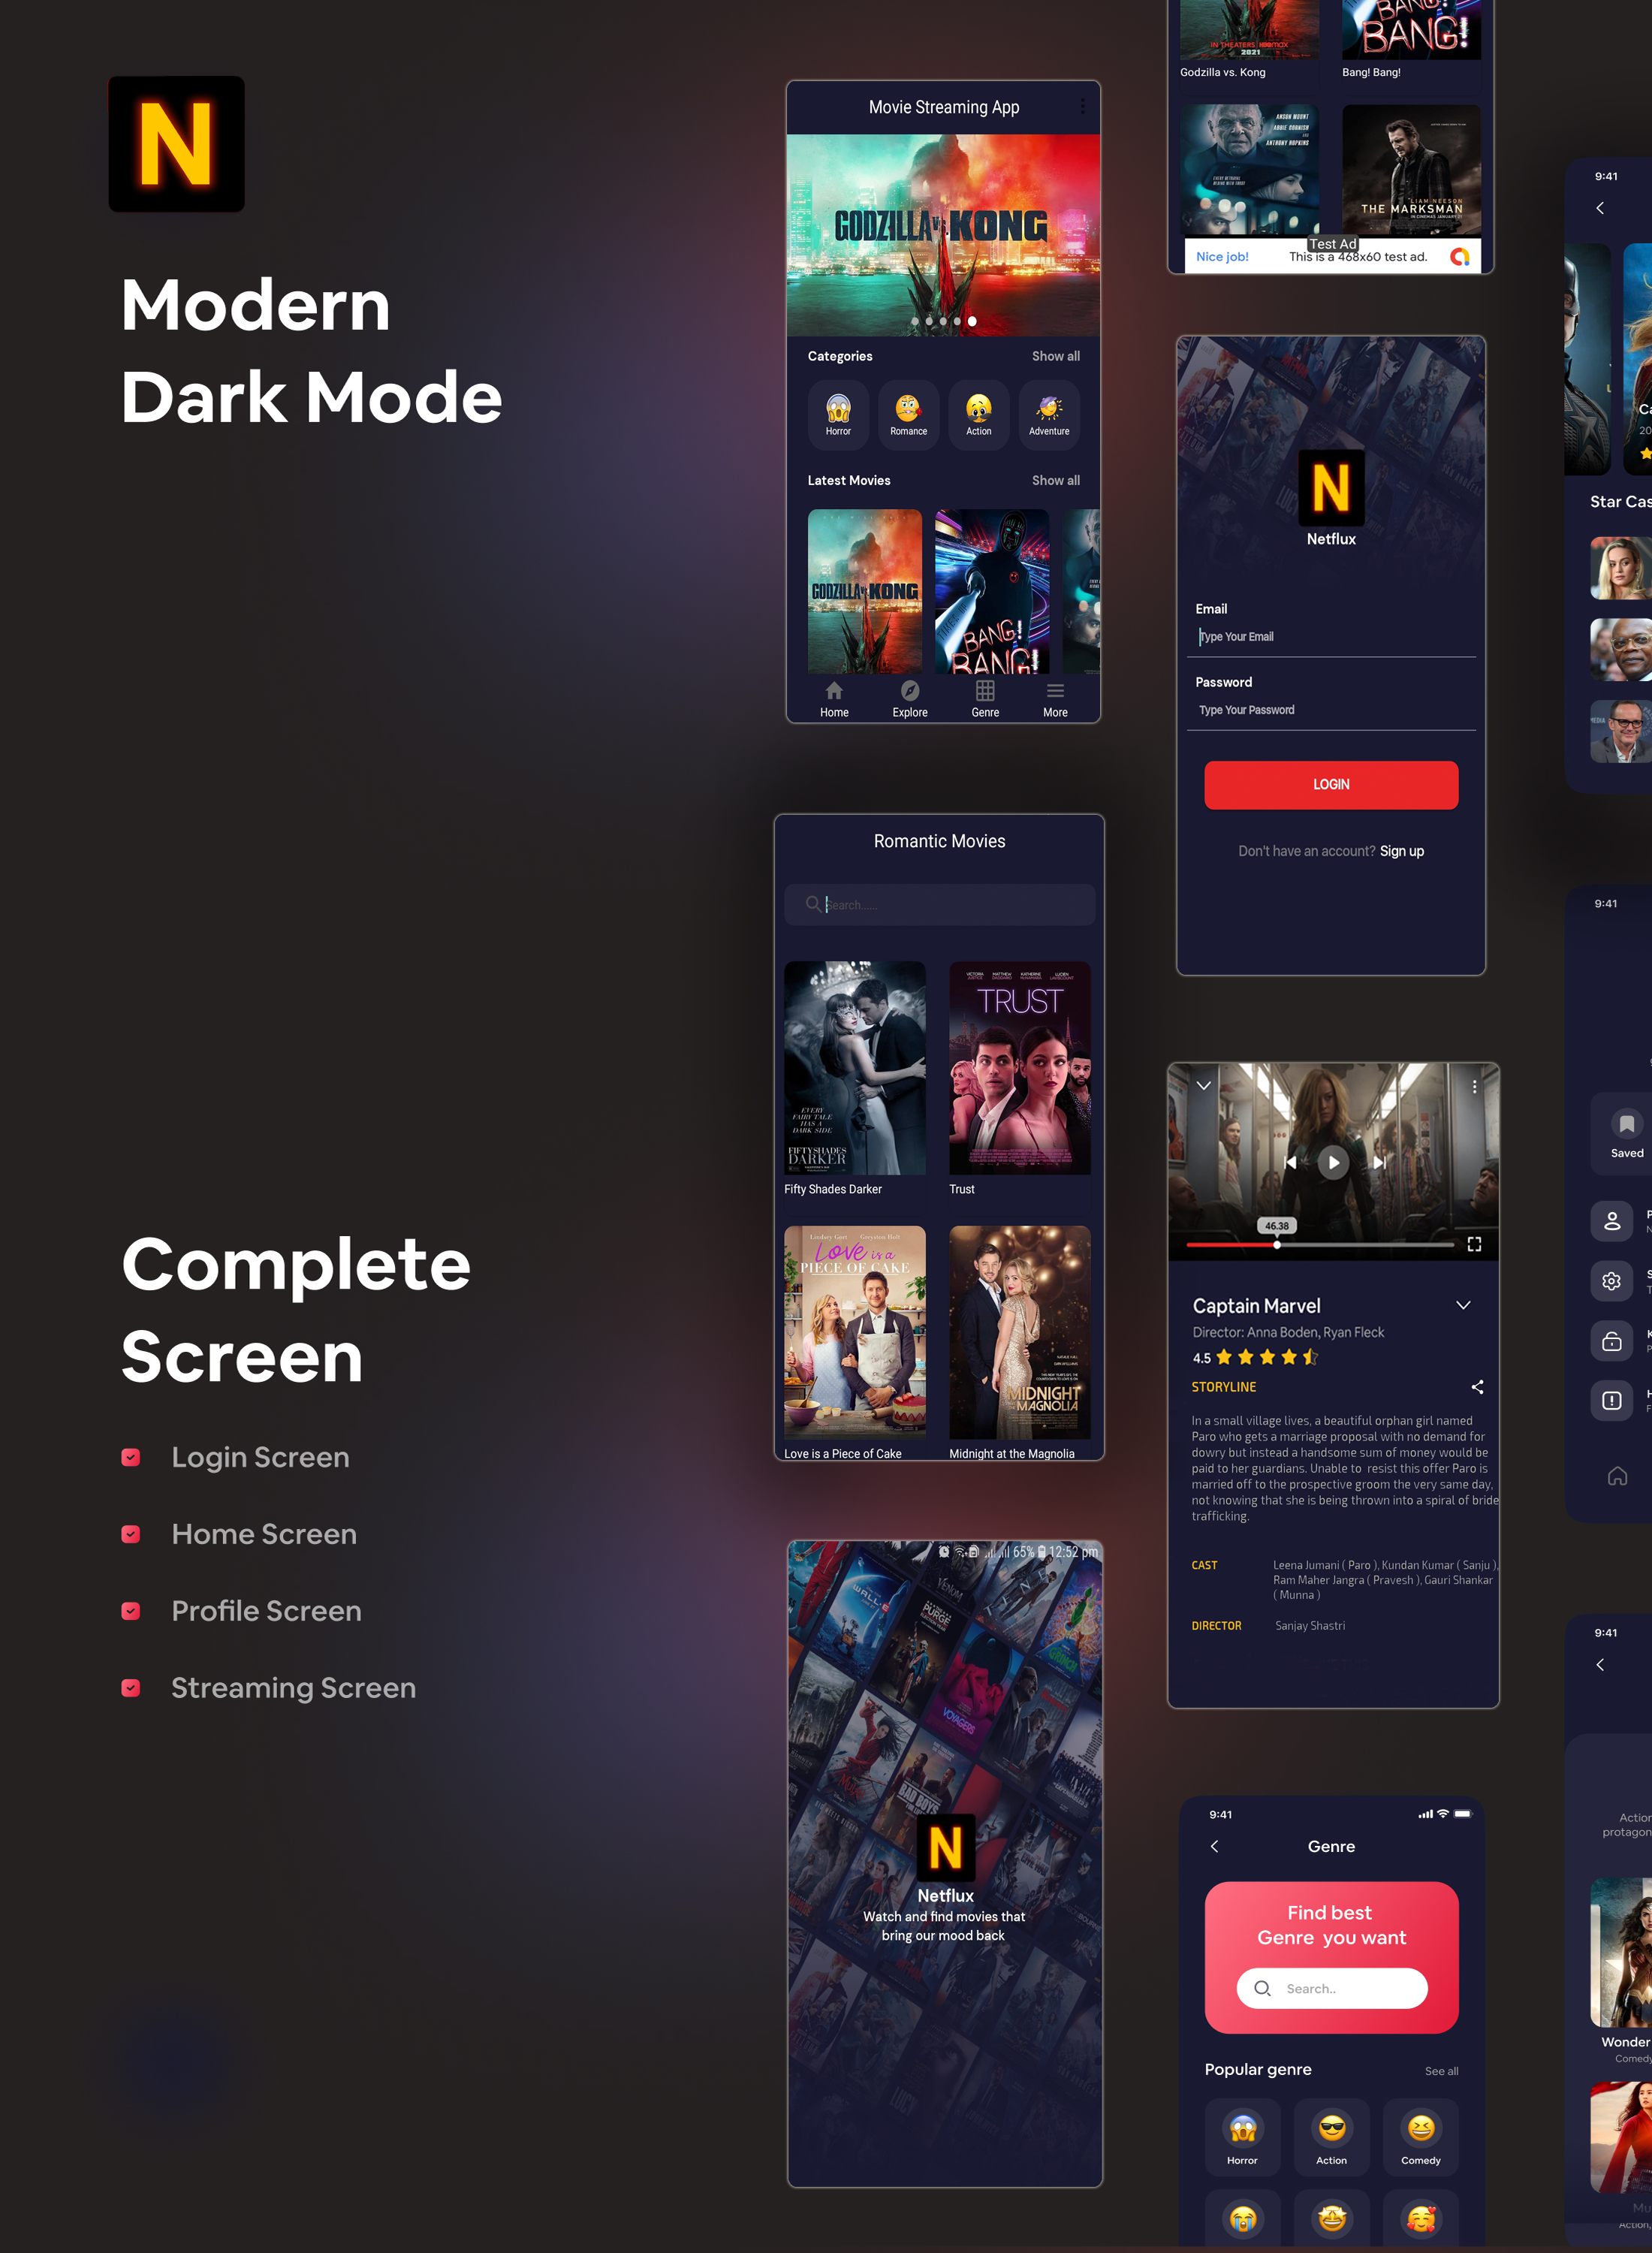 Netflux - Movie Streaming Android App - 2